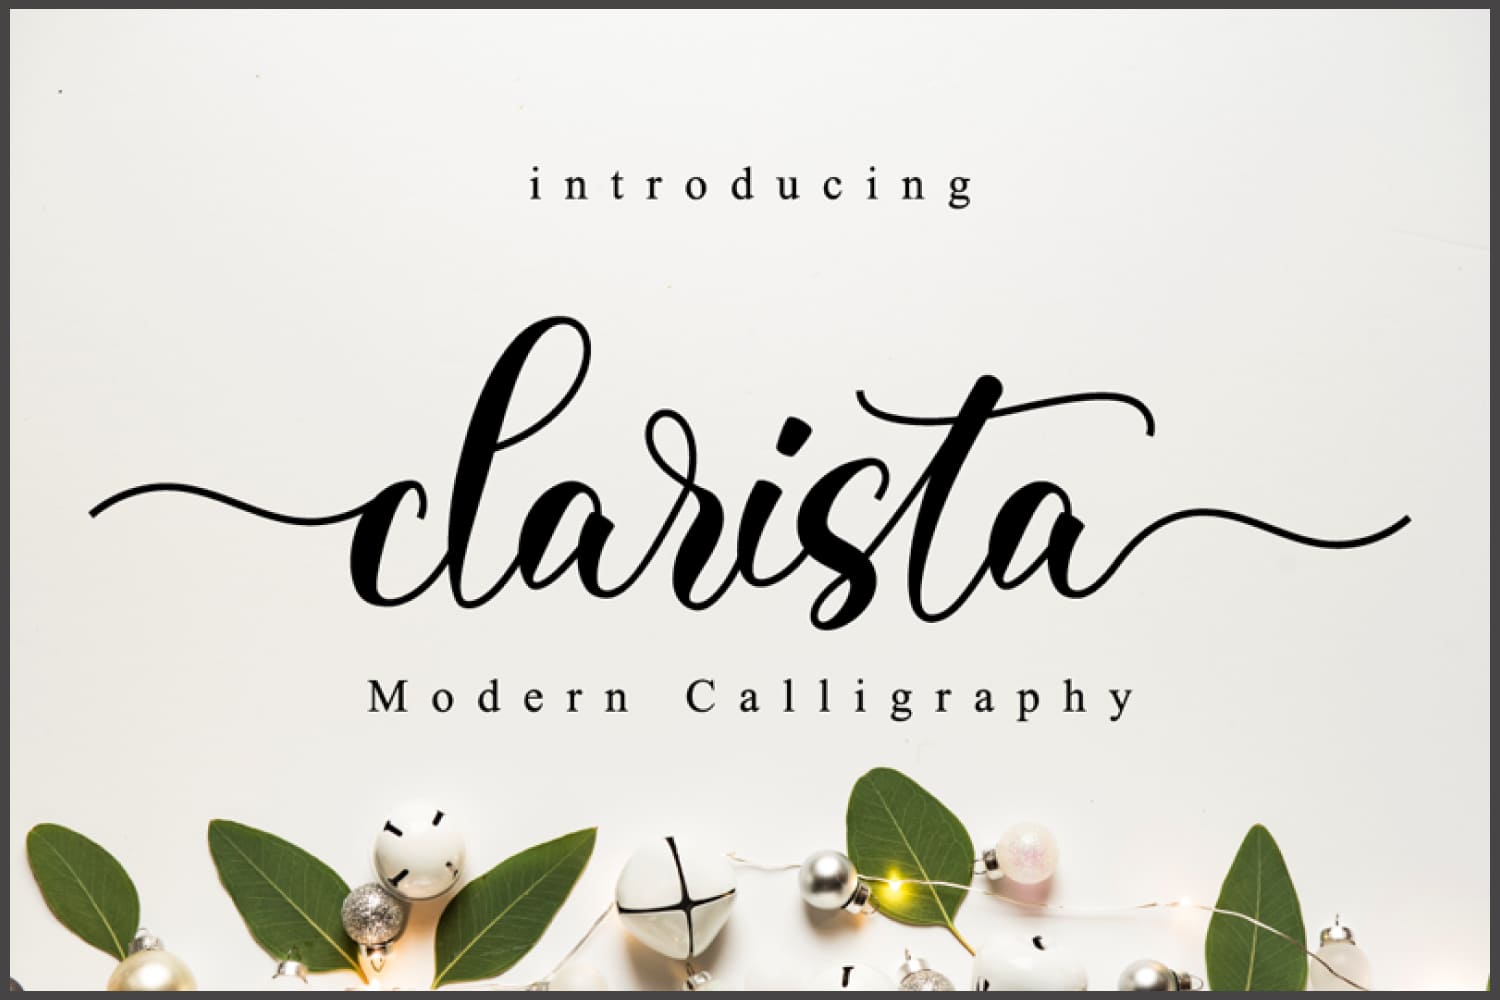 Black text Clarista on white background with decorative leaves and balloons.